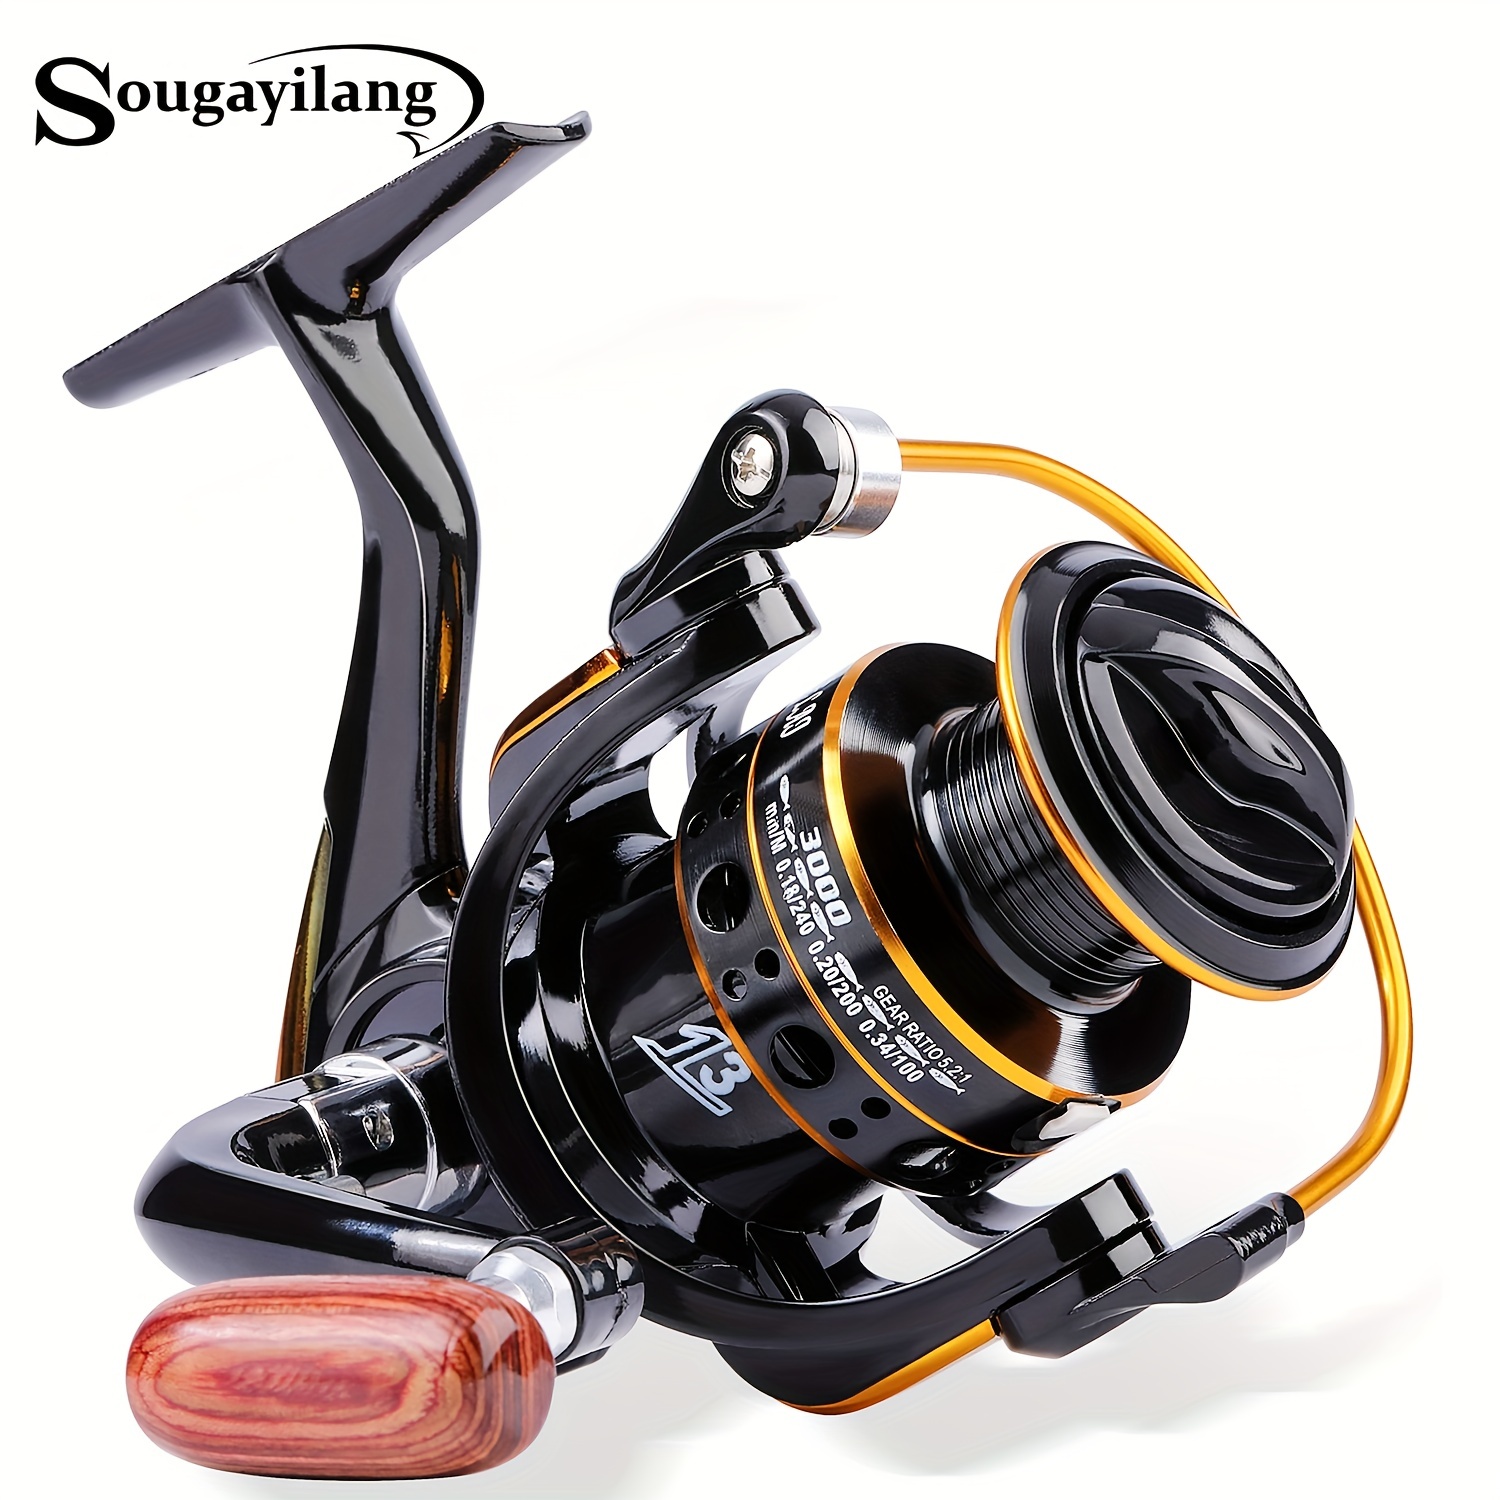 Sougayilang 13BB Spinning Fishing Reel With Left/Right Interchangeable  Collapsible Metal Handle Aluminum Spool Fishing Reel High Gear Ratio Reel  For I